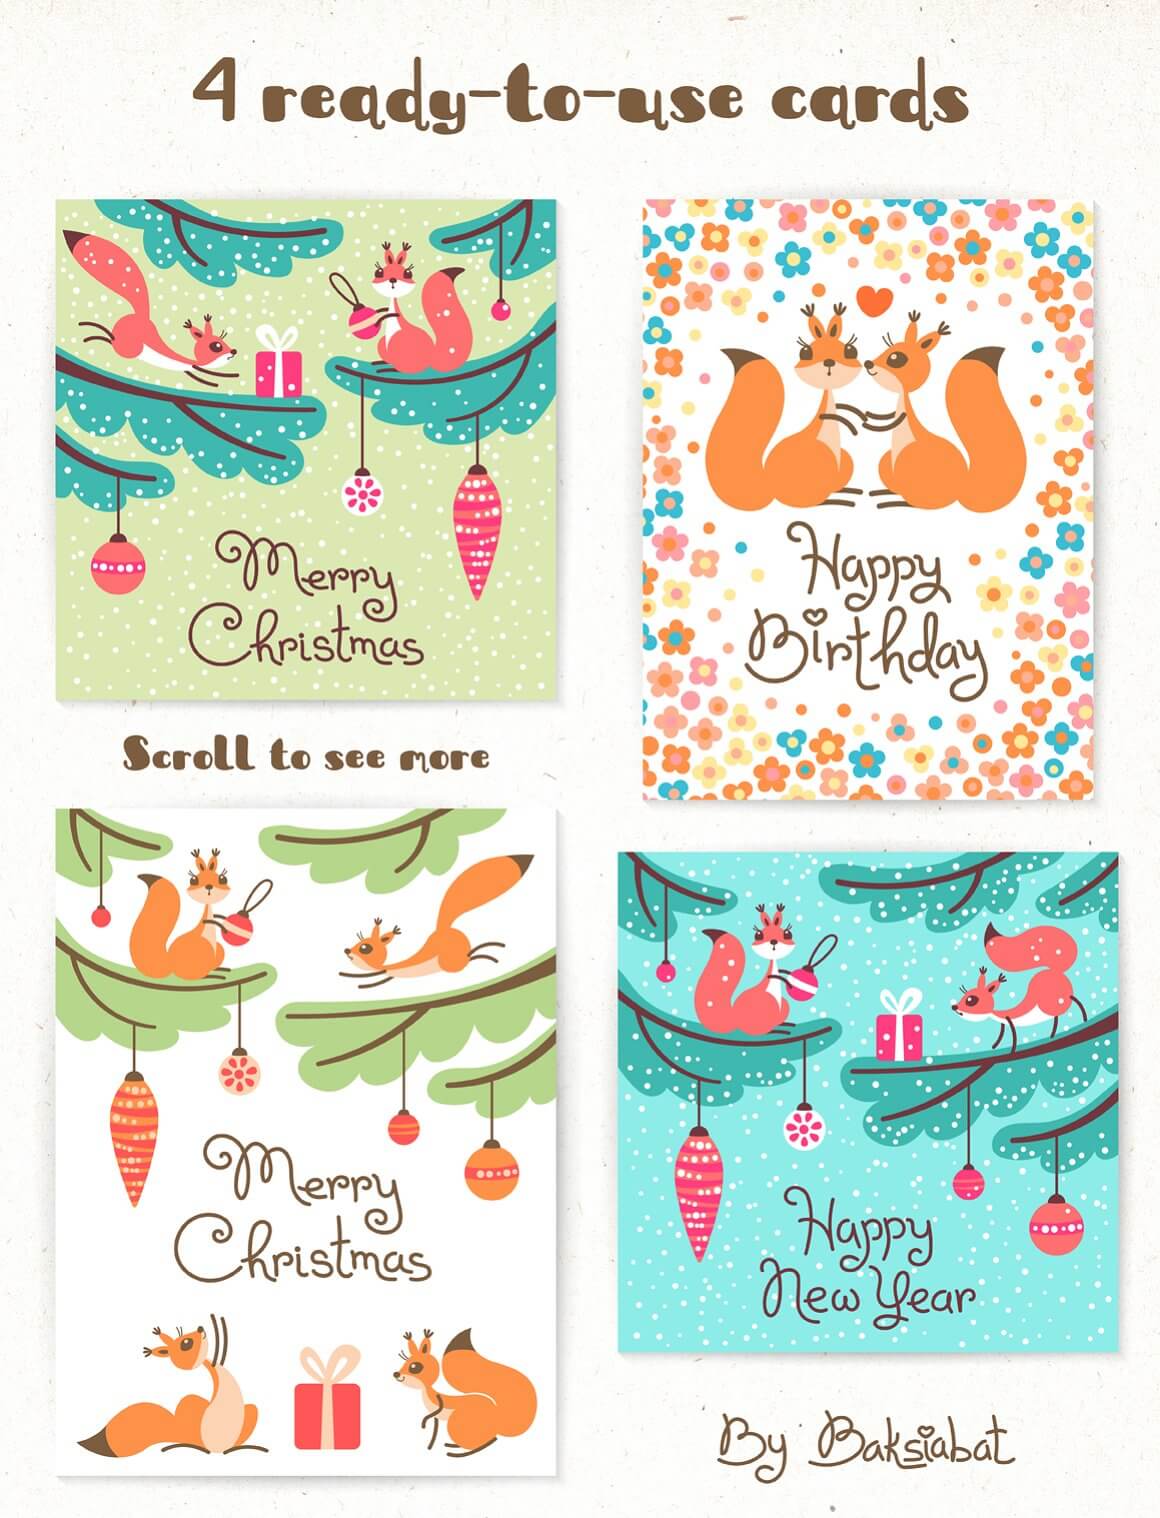 Postcards with Christmas design, painted squirrels, toys, flowers and Christmas tree branches.